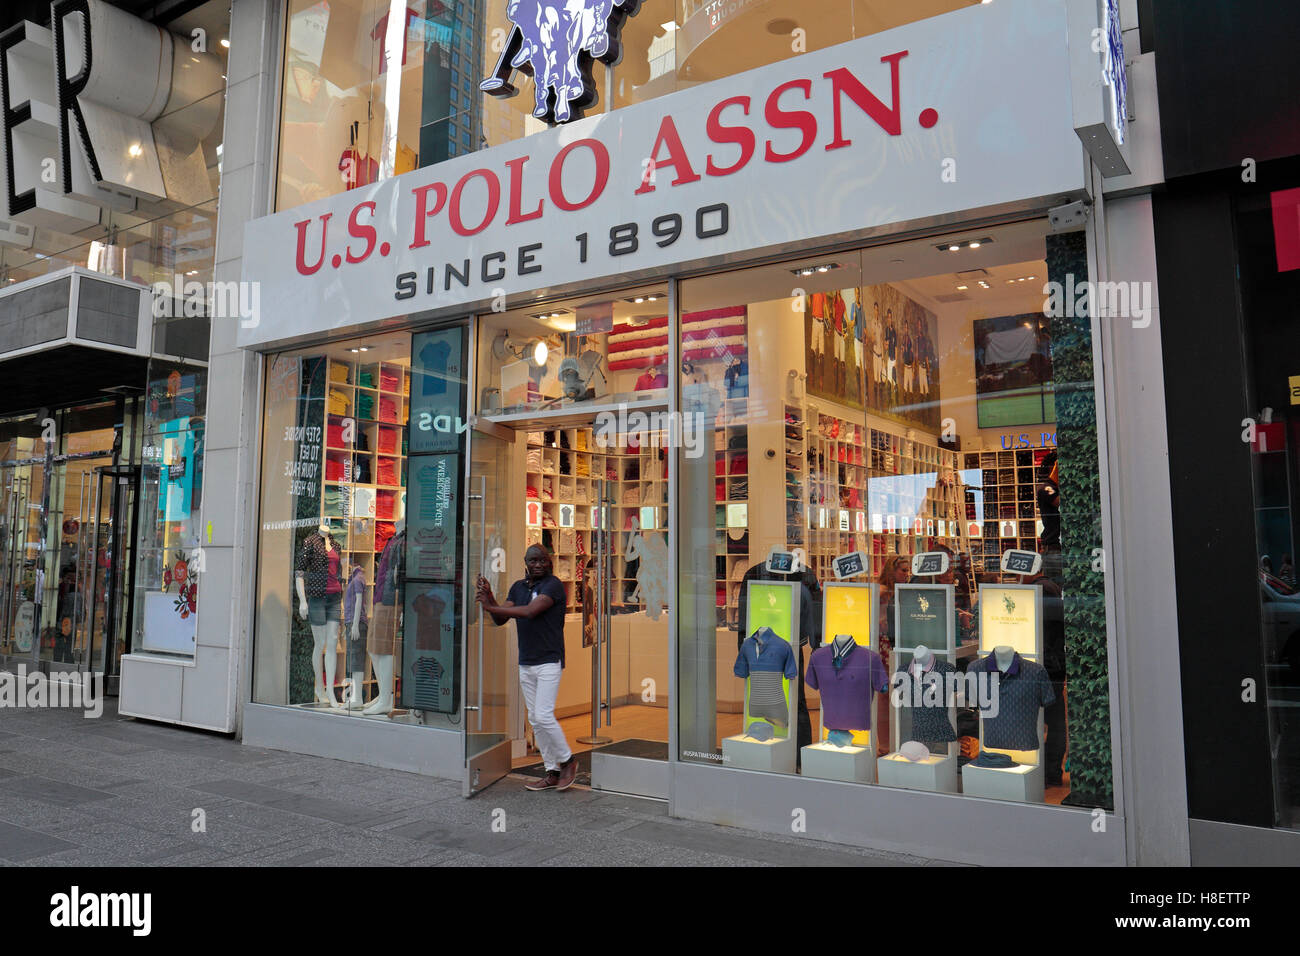 U s polo assn hi-res stock photography and images - Alamy